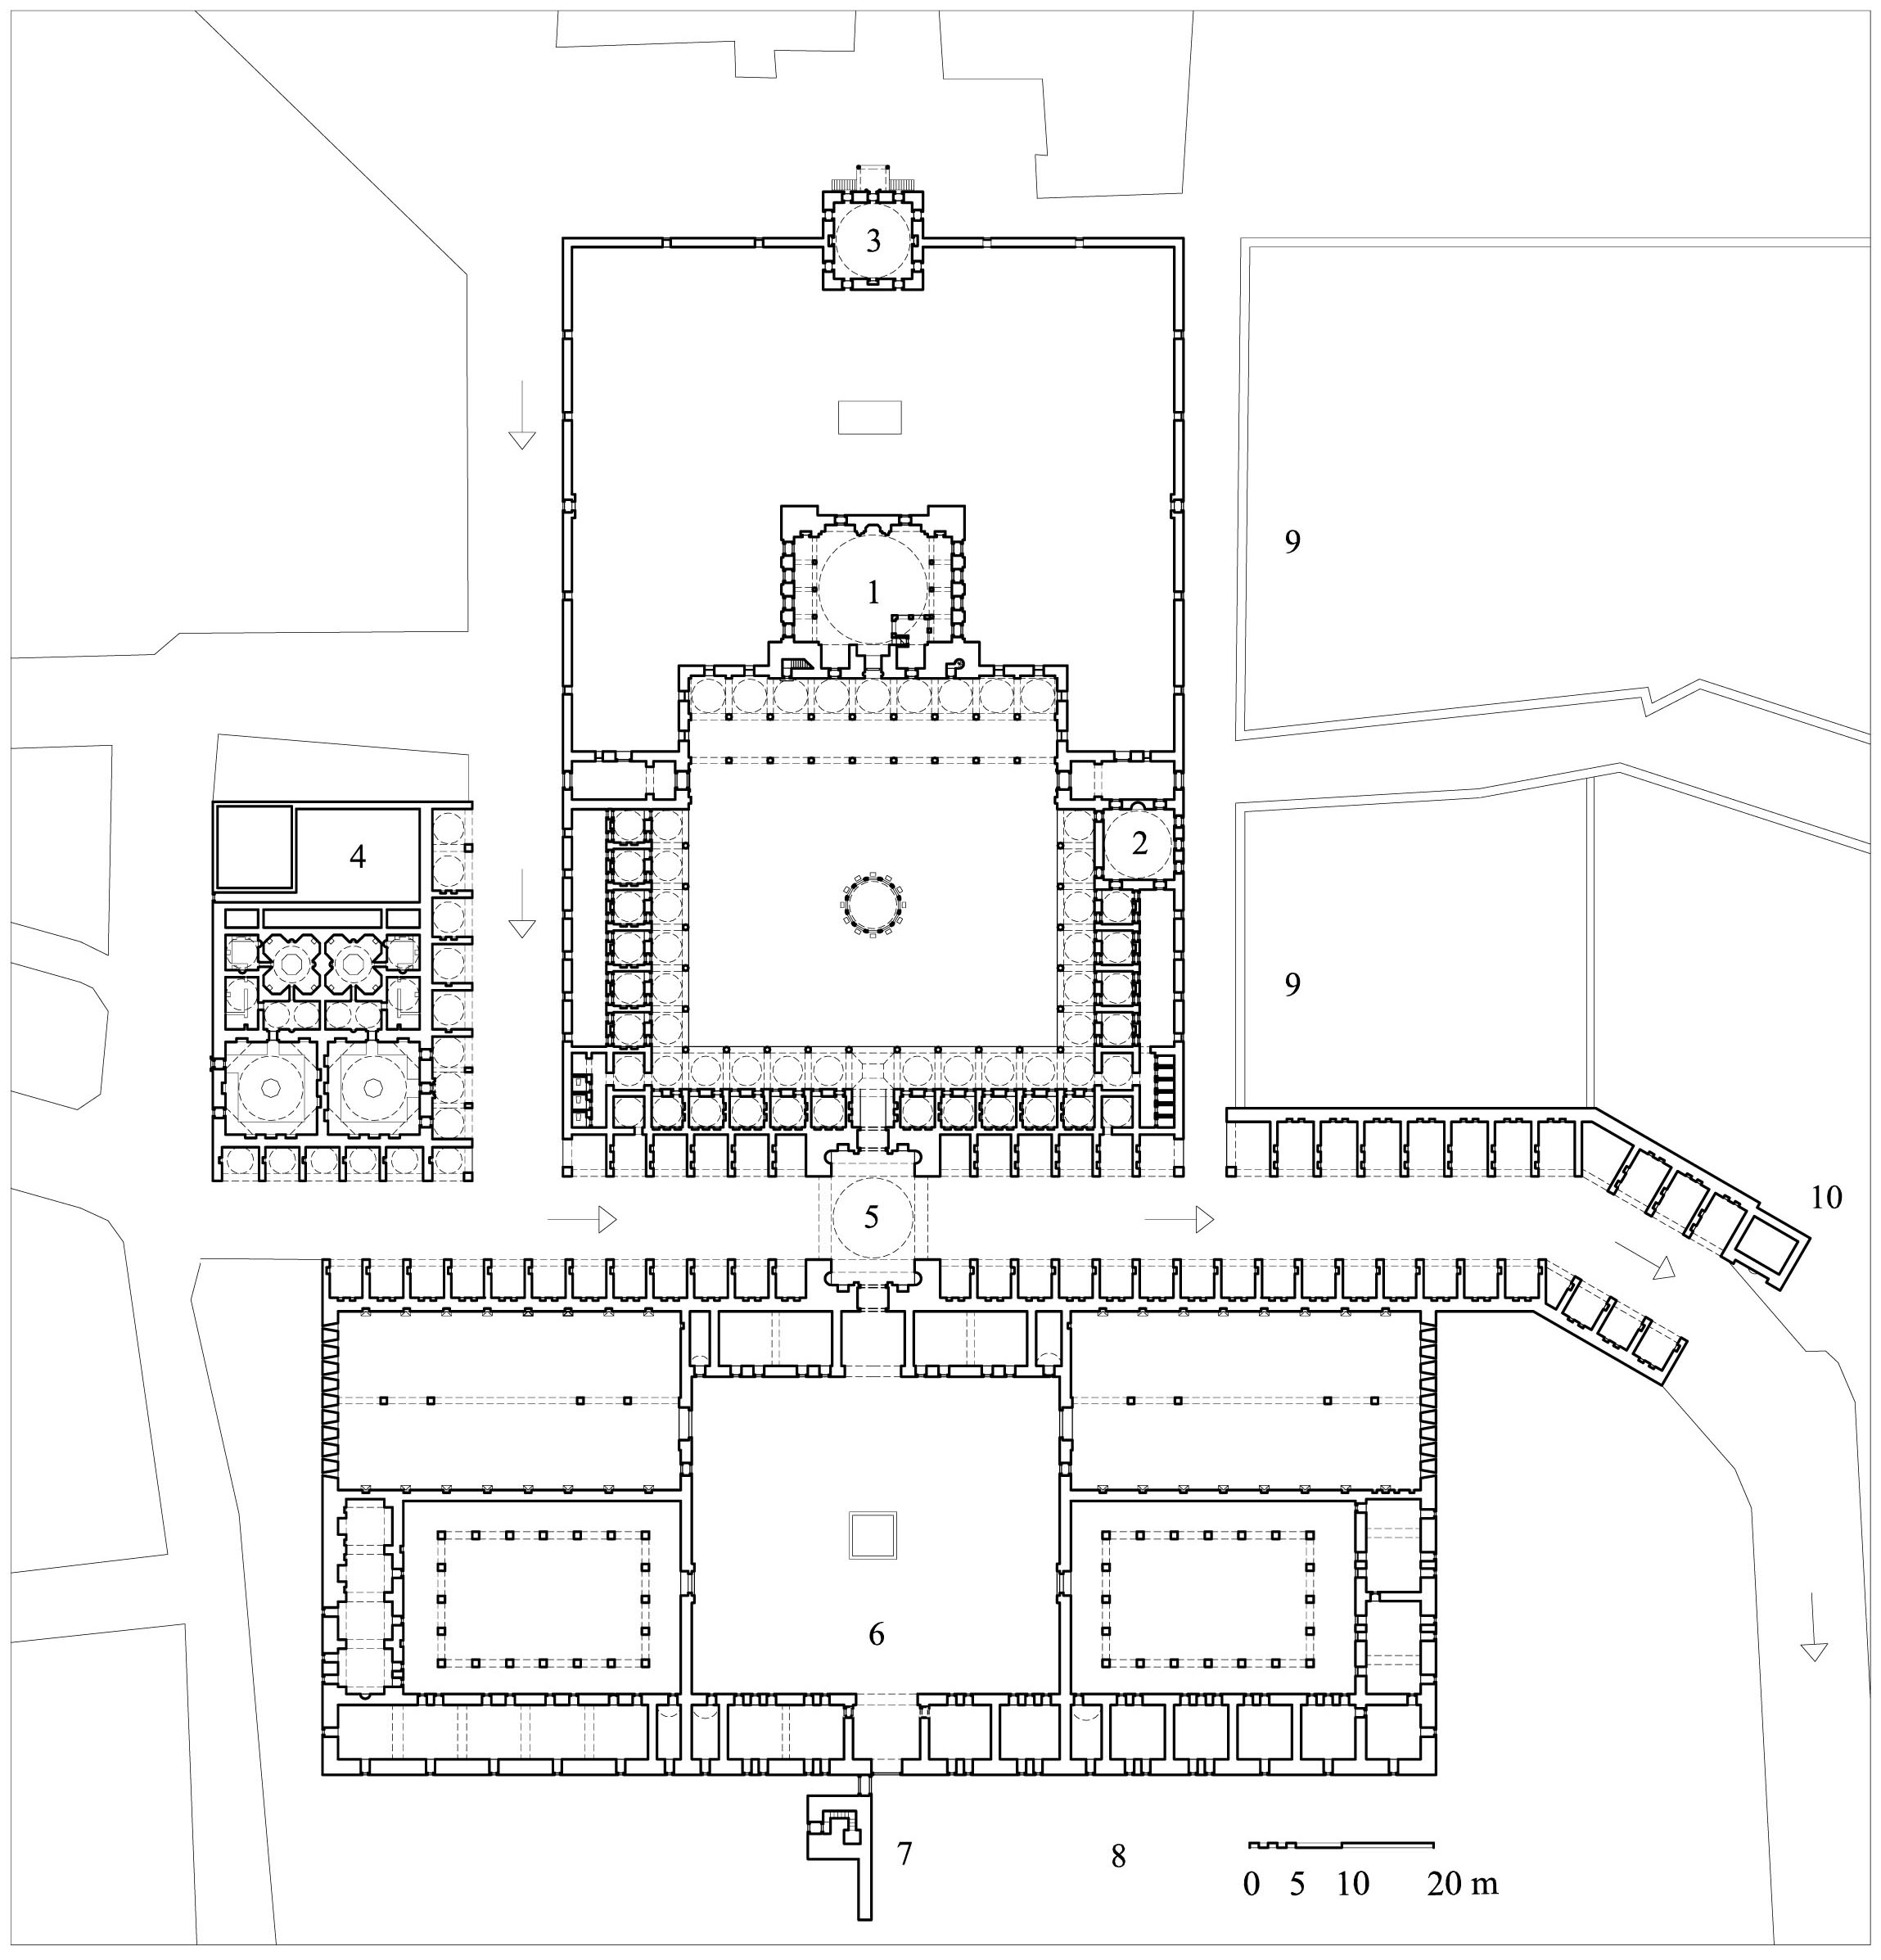 Floor plan of the complex, showing  (1) mosque, (2) madrasa, (3) elementary school, (4) double bath, (5) prayer dome, (6) double caravanserai with guestrooms and hospice (hypothetical reconstruction), (7) watchtower of waqf administrator's residence, (8) site of royal palace, (9) residences for the professor, preacher, imam and four muezzins, (10) public fountain and route toward the bridge.  Arrows designate the road between Istanbul and Edirne